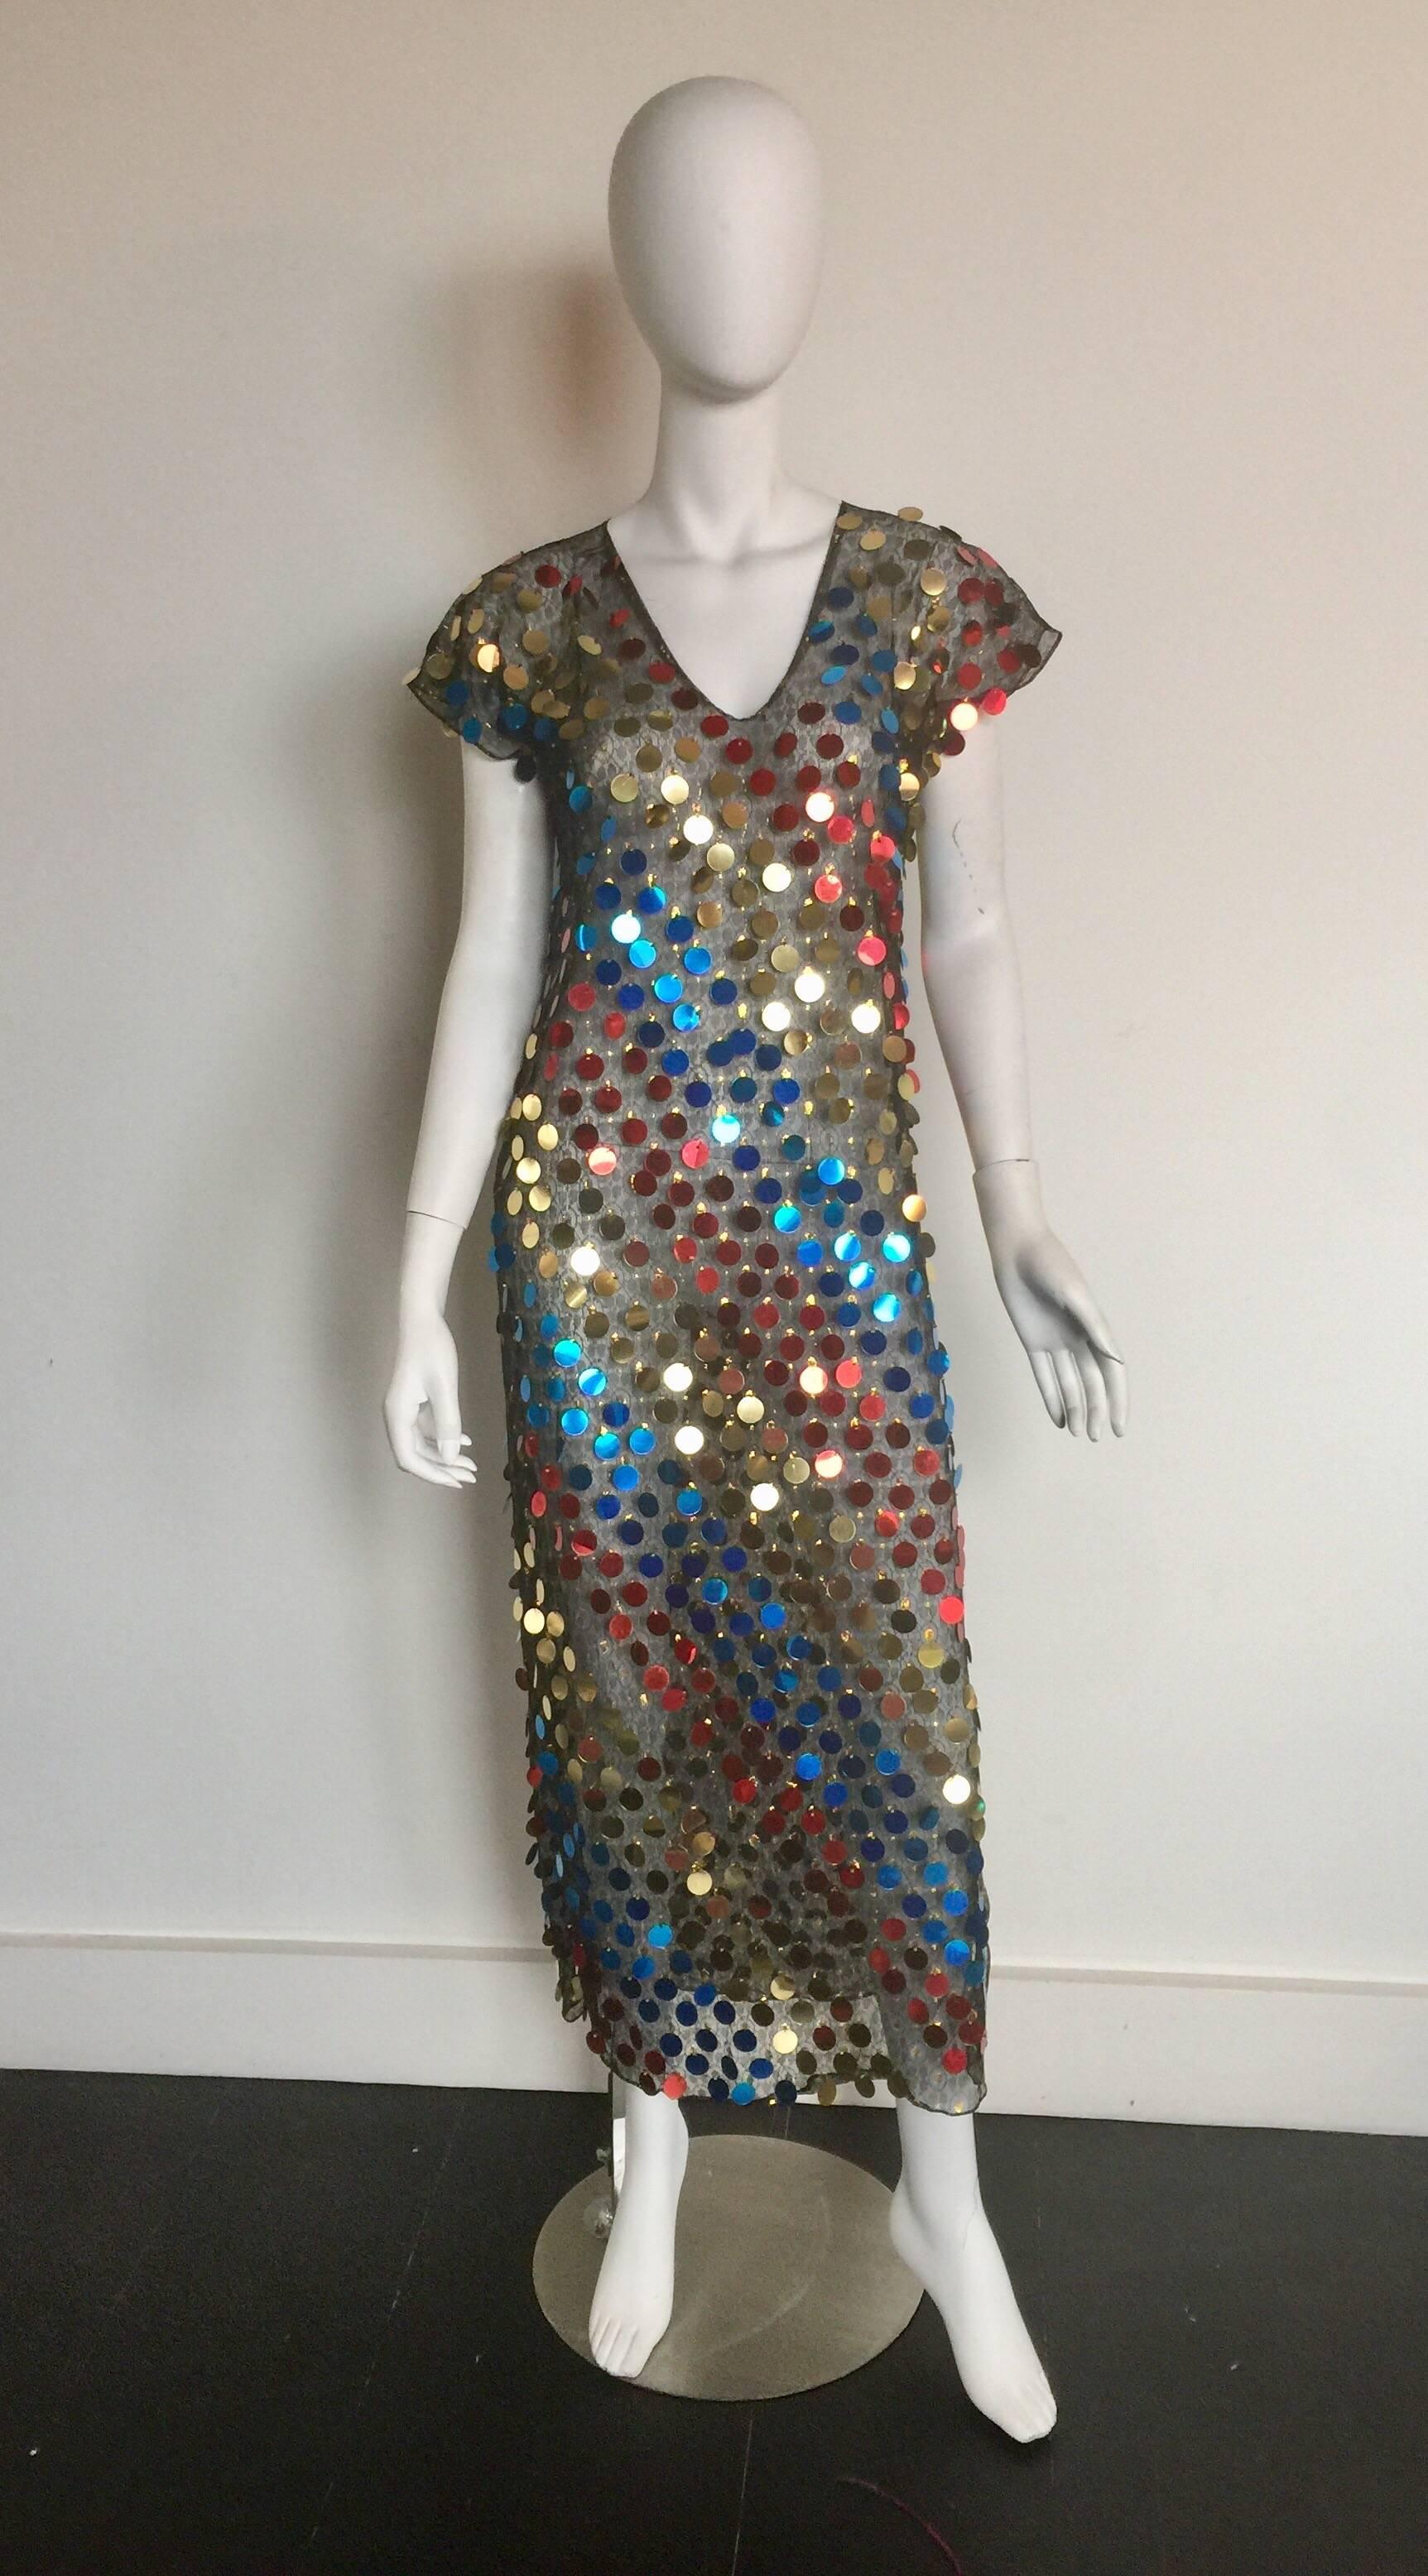 This sheer midi dress is covered in gold blue and red large sequins.  It is an awesome party dress or costume party piece.  It has a V neck and short sleeves.  It is in good condition and is not labeled a designer.  